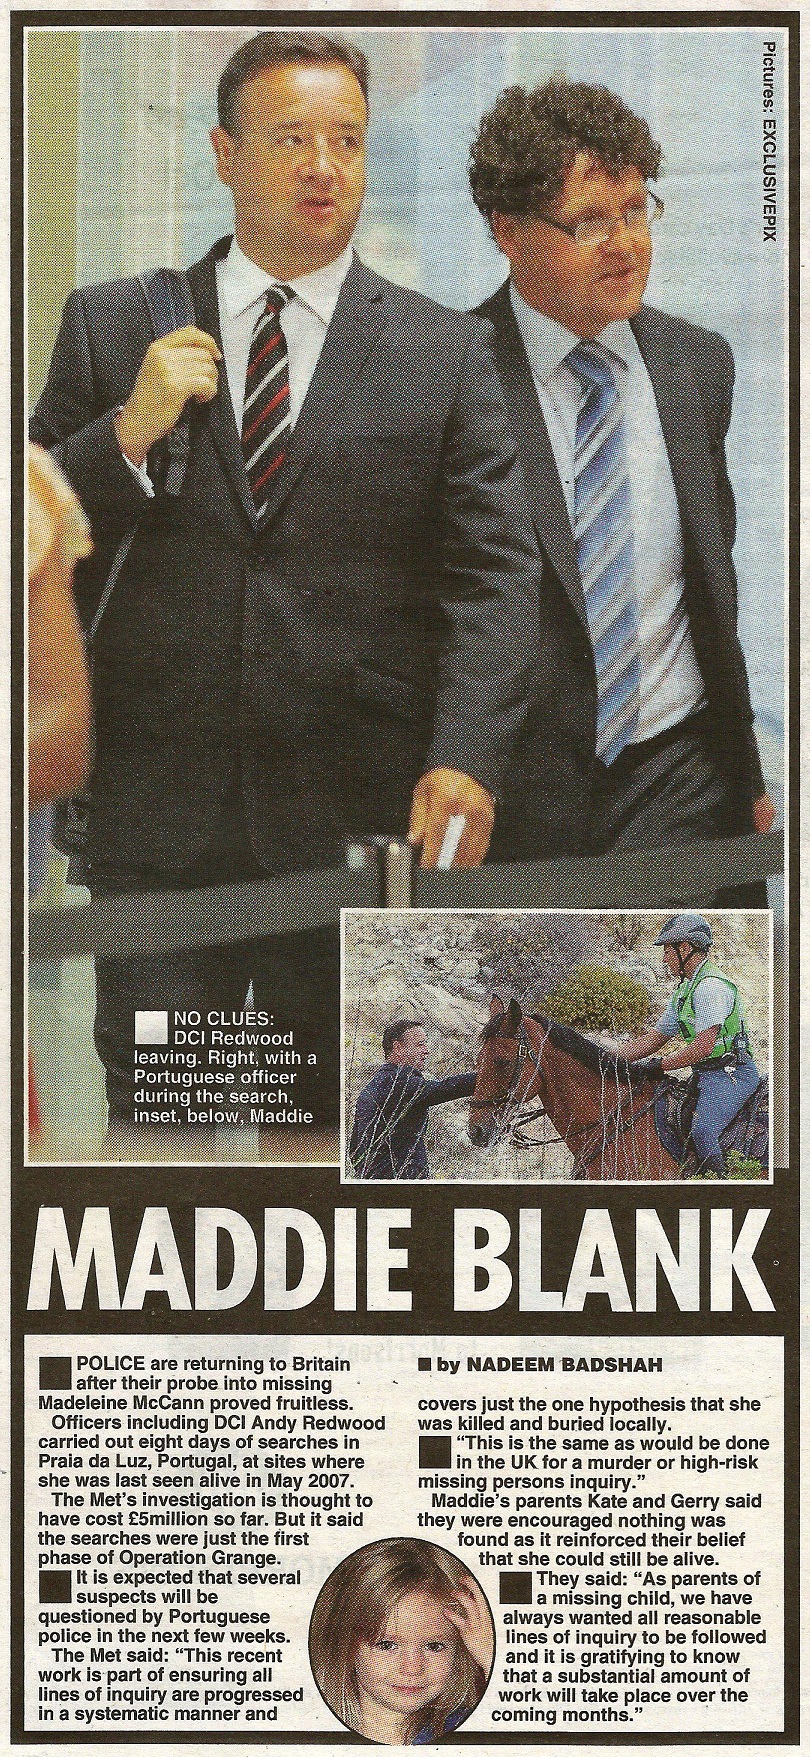 Maddie blank - Daily Star, 14 June 2014 (paper edition, page 17)